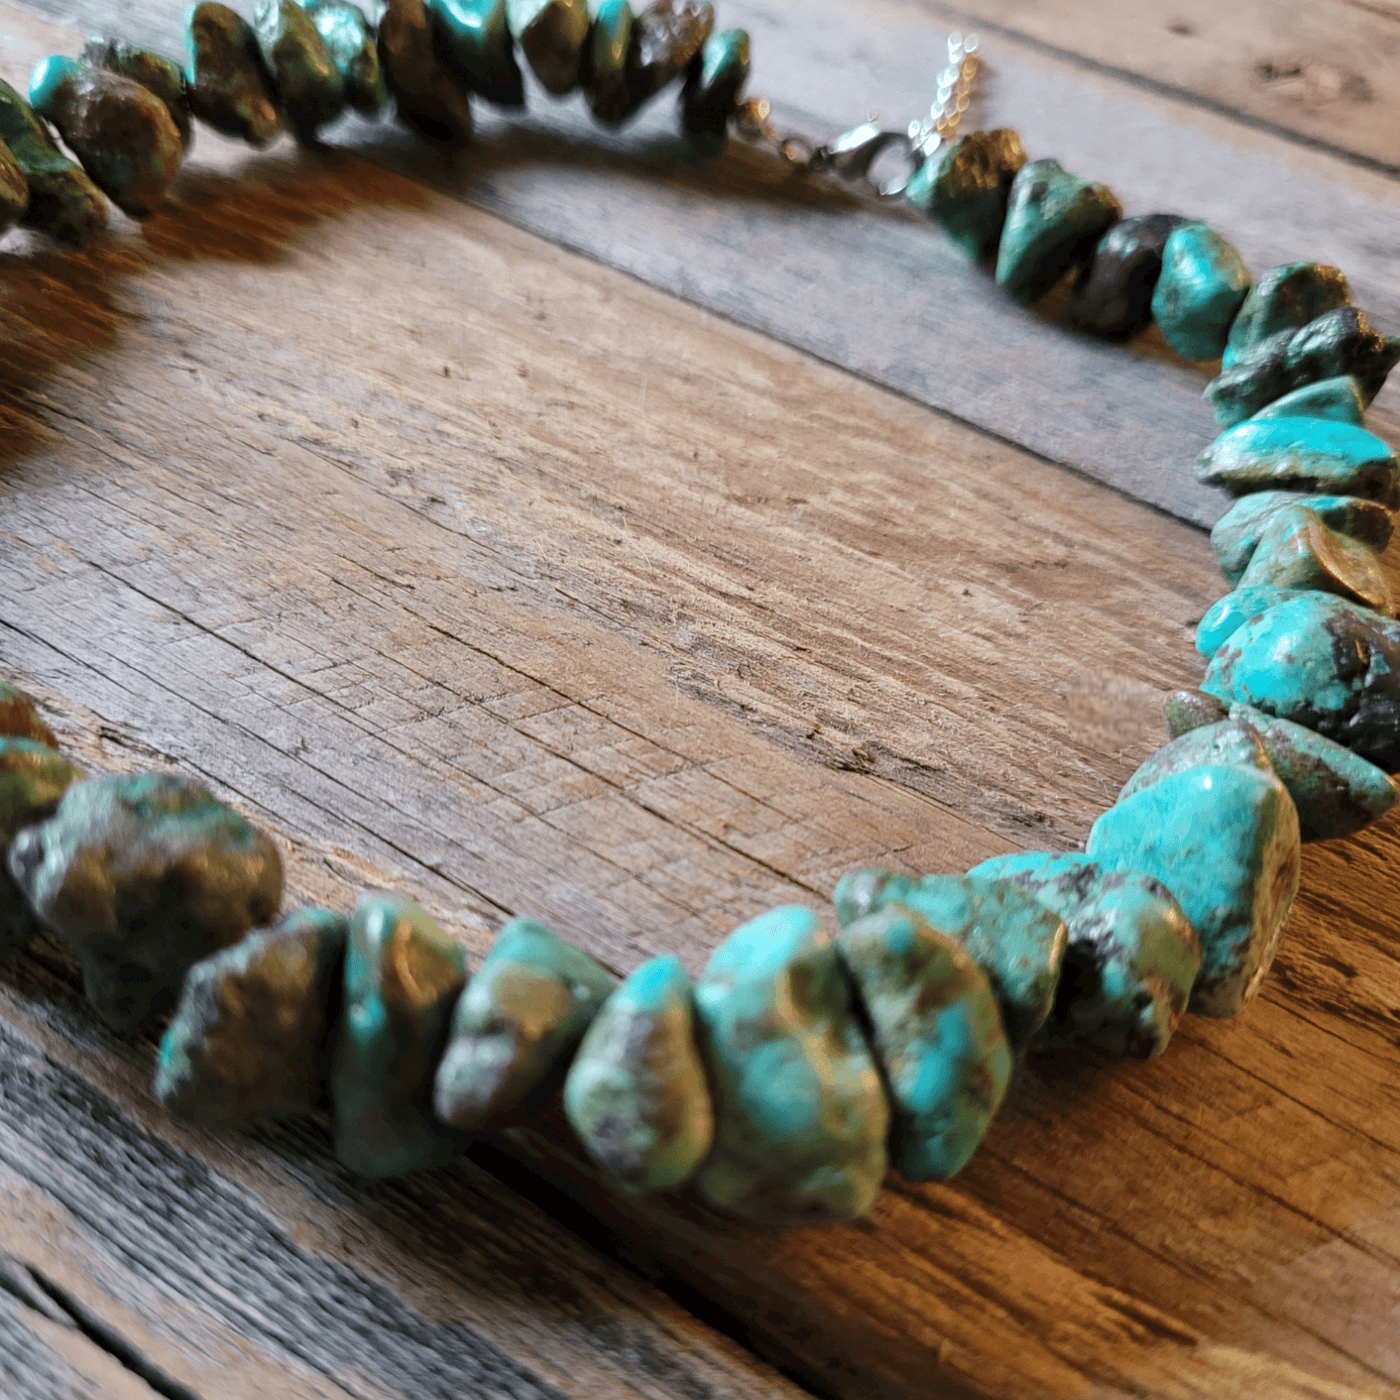 Chunky Genuine Natural Turquoise Collar Length Necklace - Ranch Junkie Mercantile LLC